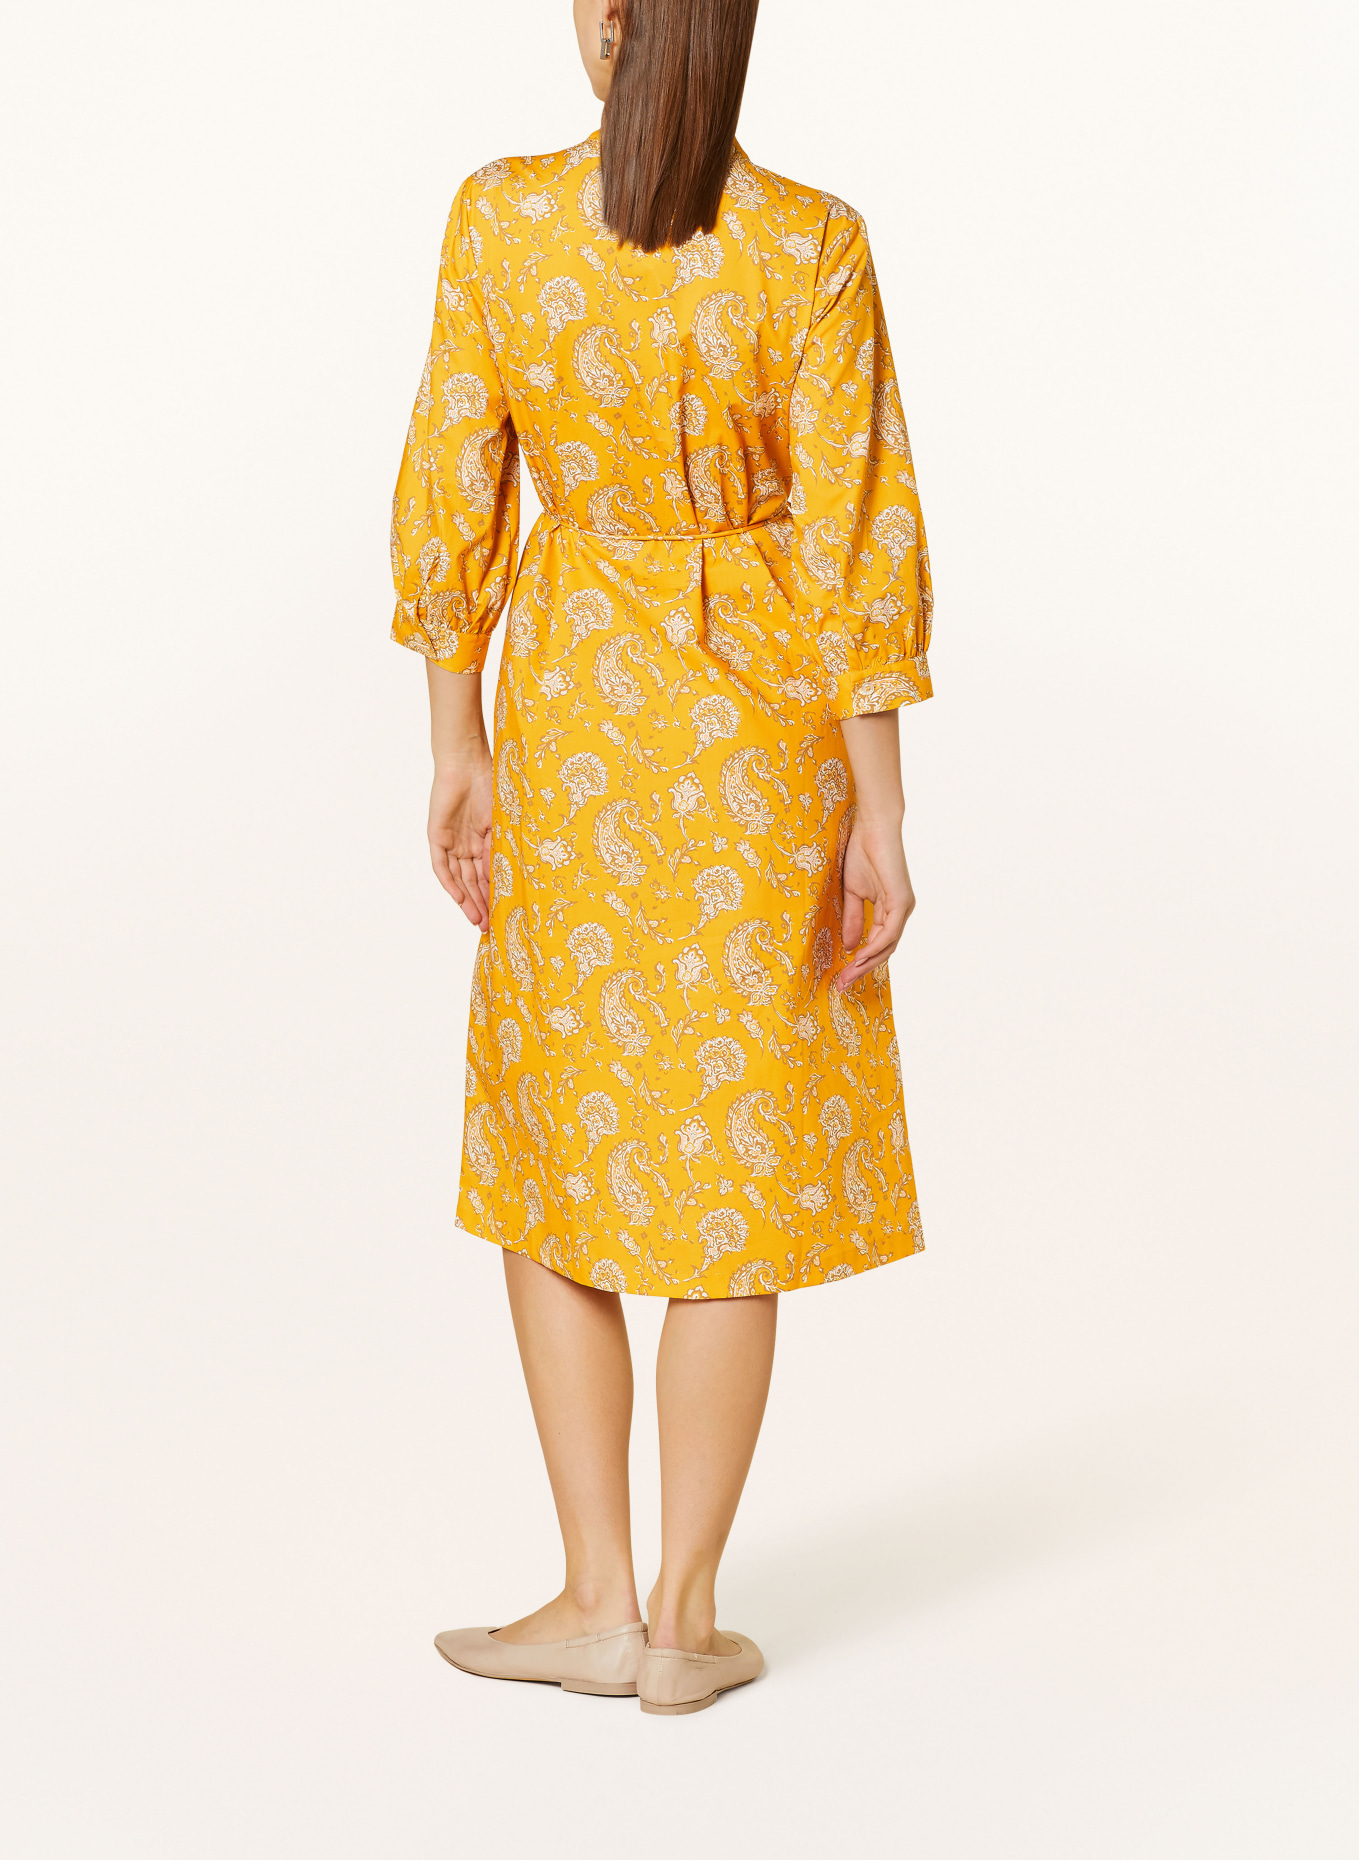 MAERZ MUENCHEN Shirt dress with 3/4 sleeves, Color: YELLOW/ WHITE/ BROWN (Image 3)